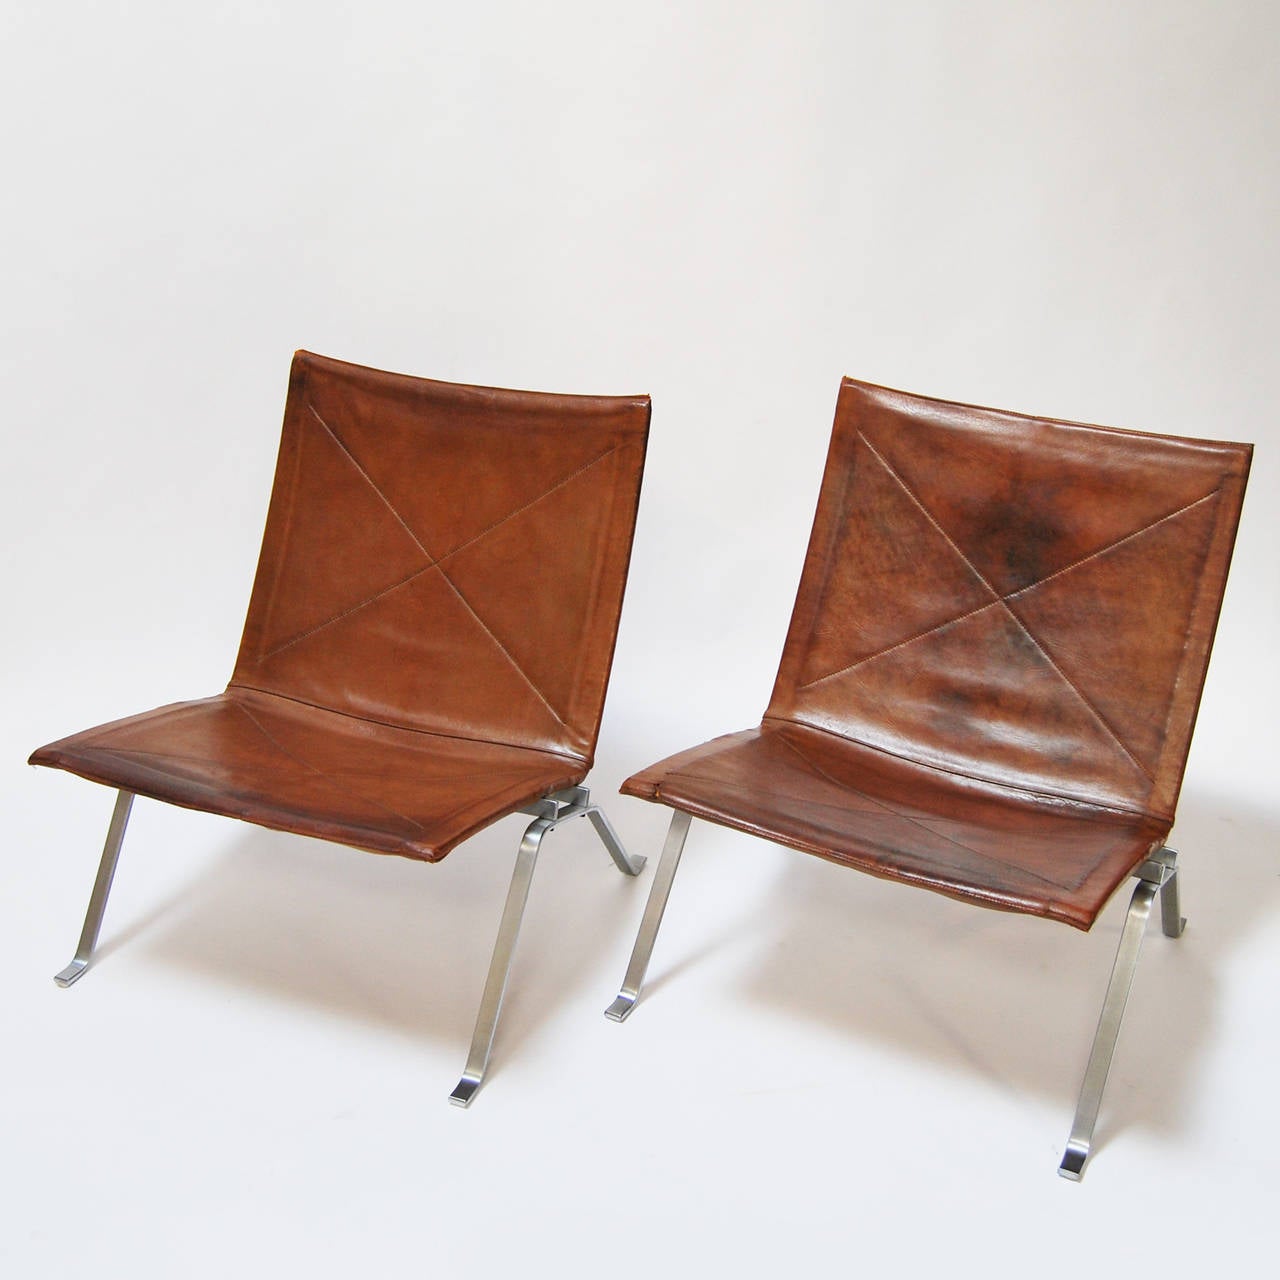 Pair of lounge chairs designed by Poul Kjaerholm in 1956.
Manufactured by E. Kold Christensen. 
Cognac leather seats and matte chrome-plated structured.

Stamp of the manufacture impressed in the structure.